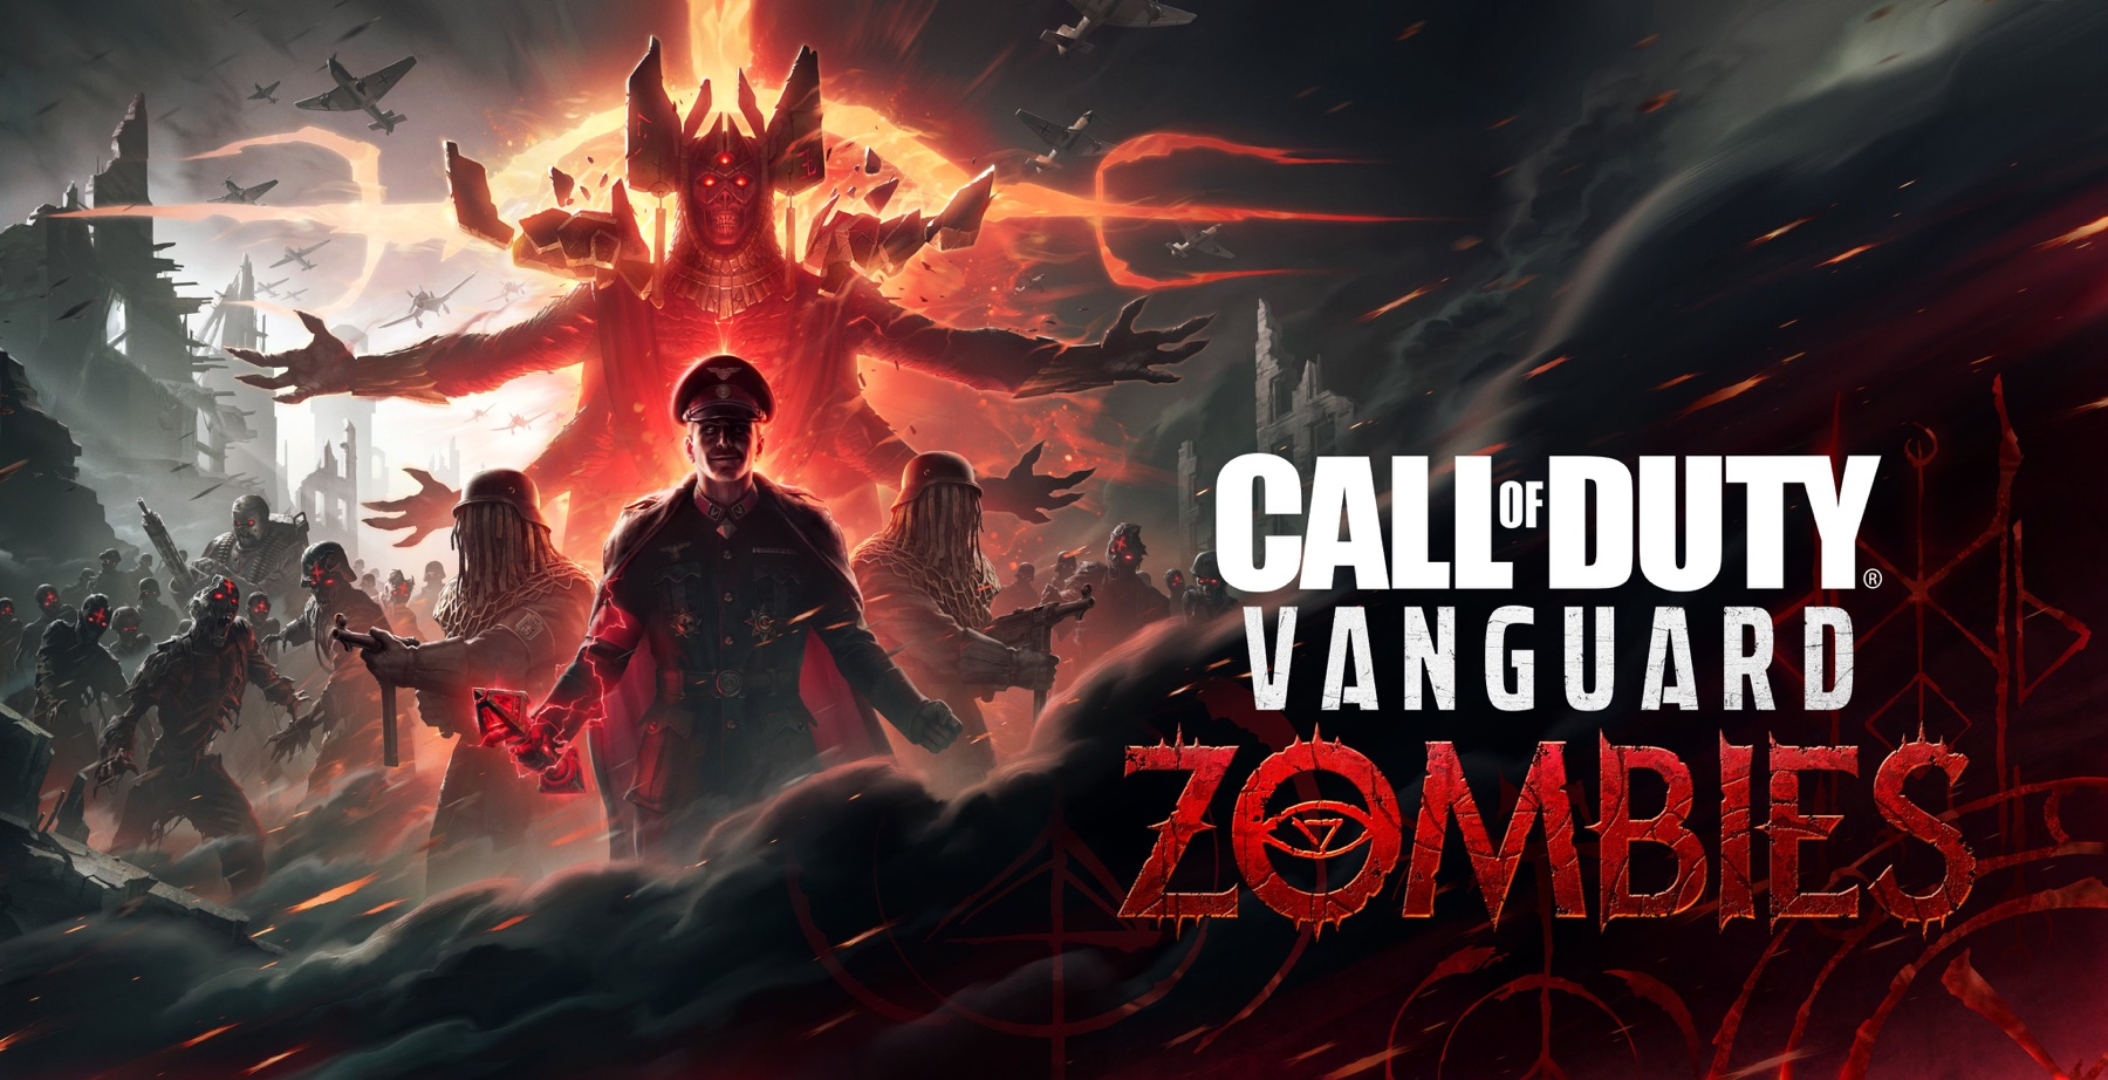 Call Of Duty Hd Vanguard Zombies Wallpaper Hd Games 4k Wallpapers Images Photos And Background Wallpapers Den